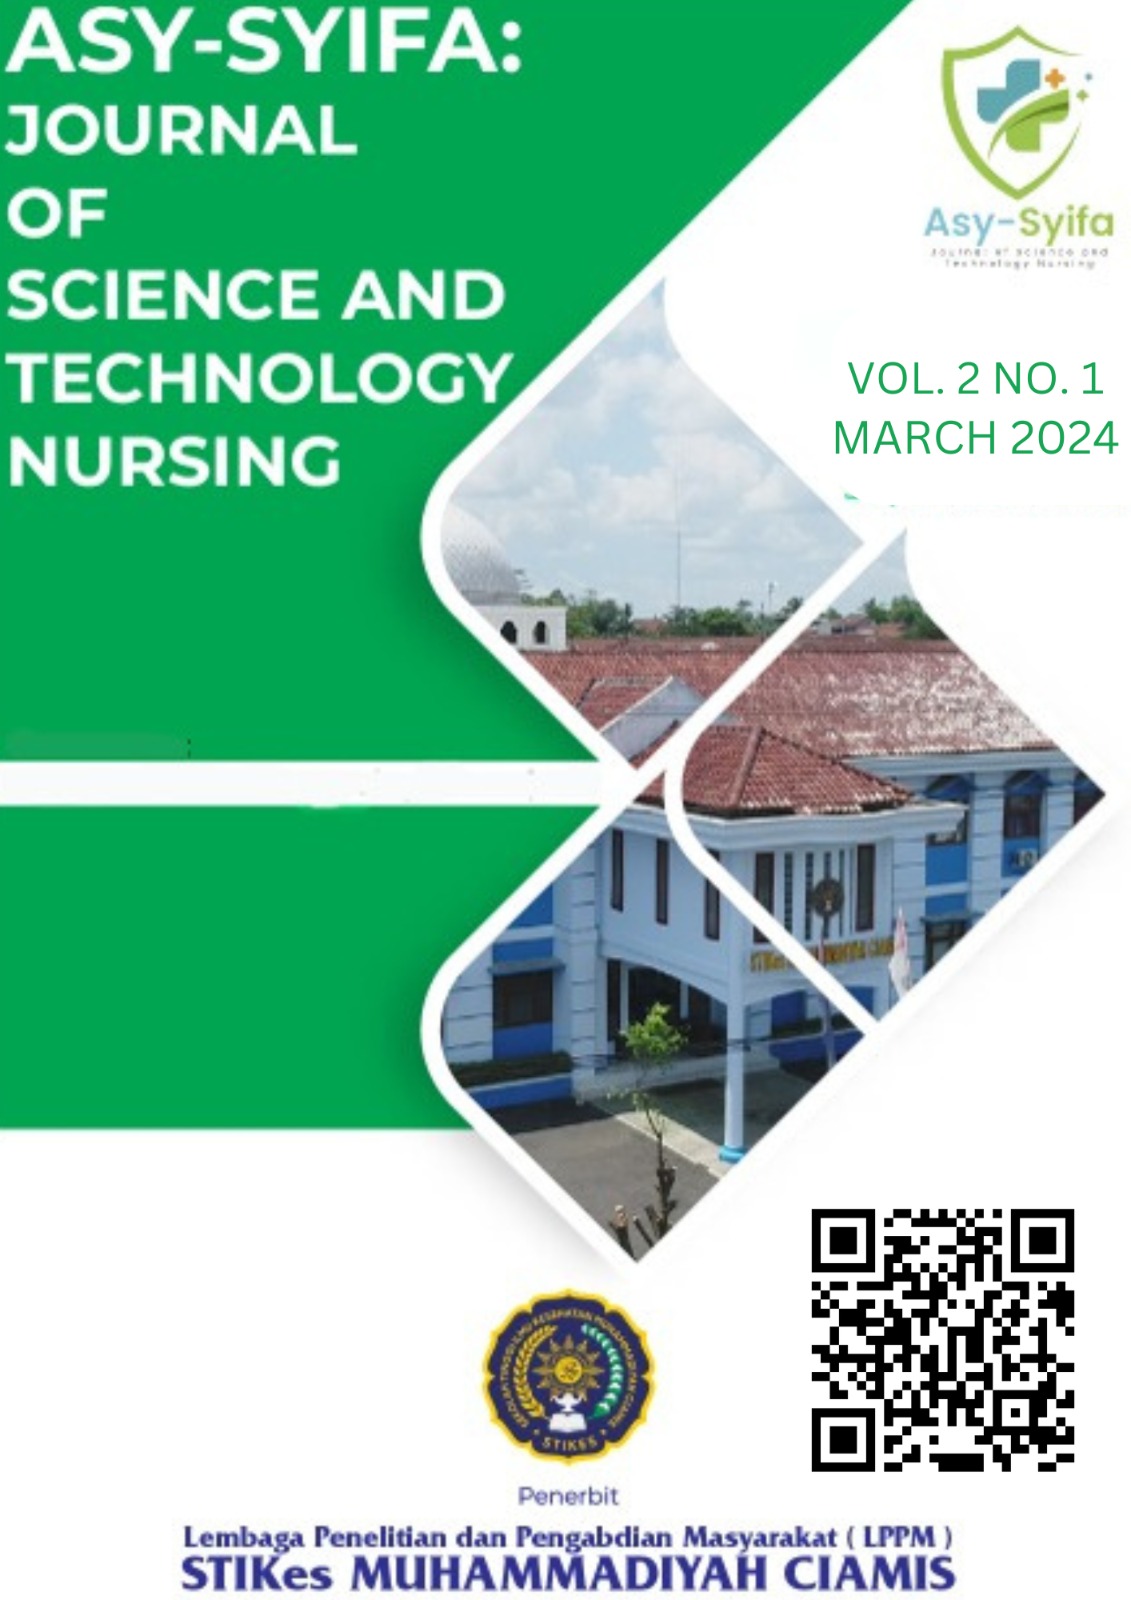 					View Vol. 2 No. 1 (2024): Asy-Syifa: Journal Of Science and Technology Nursing (March 2024)
				